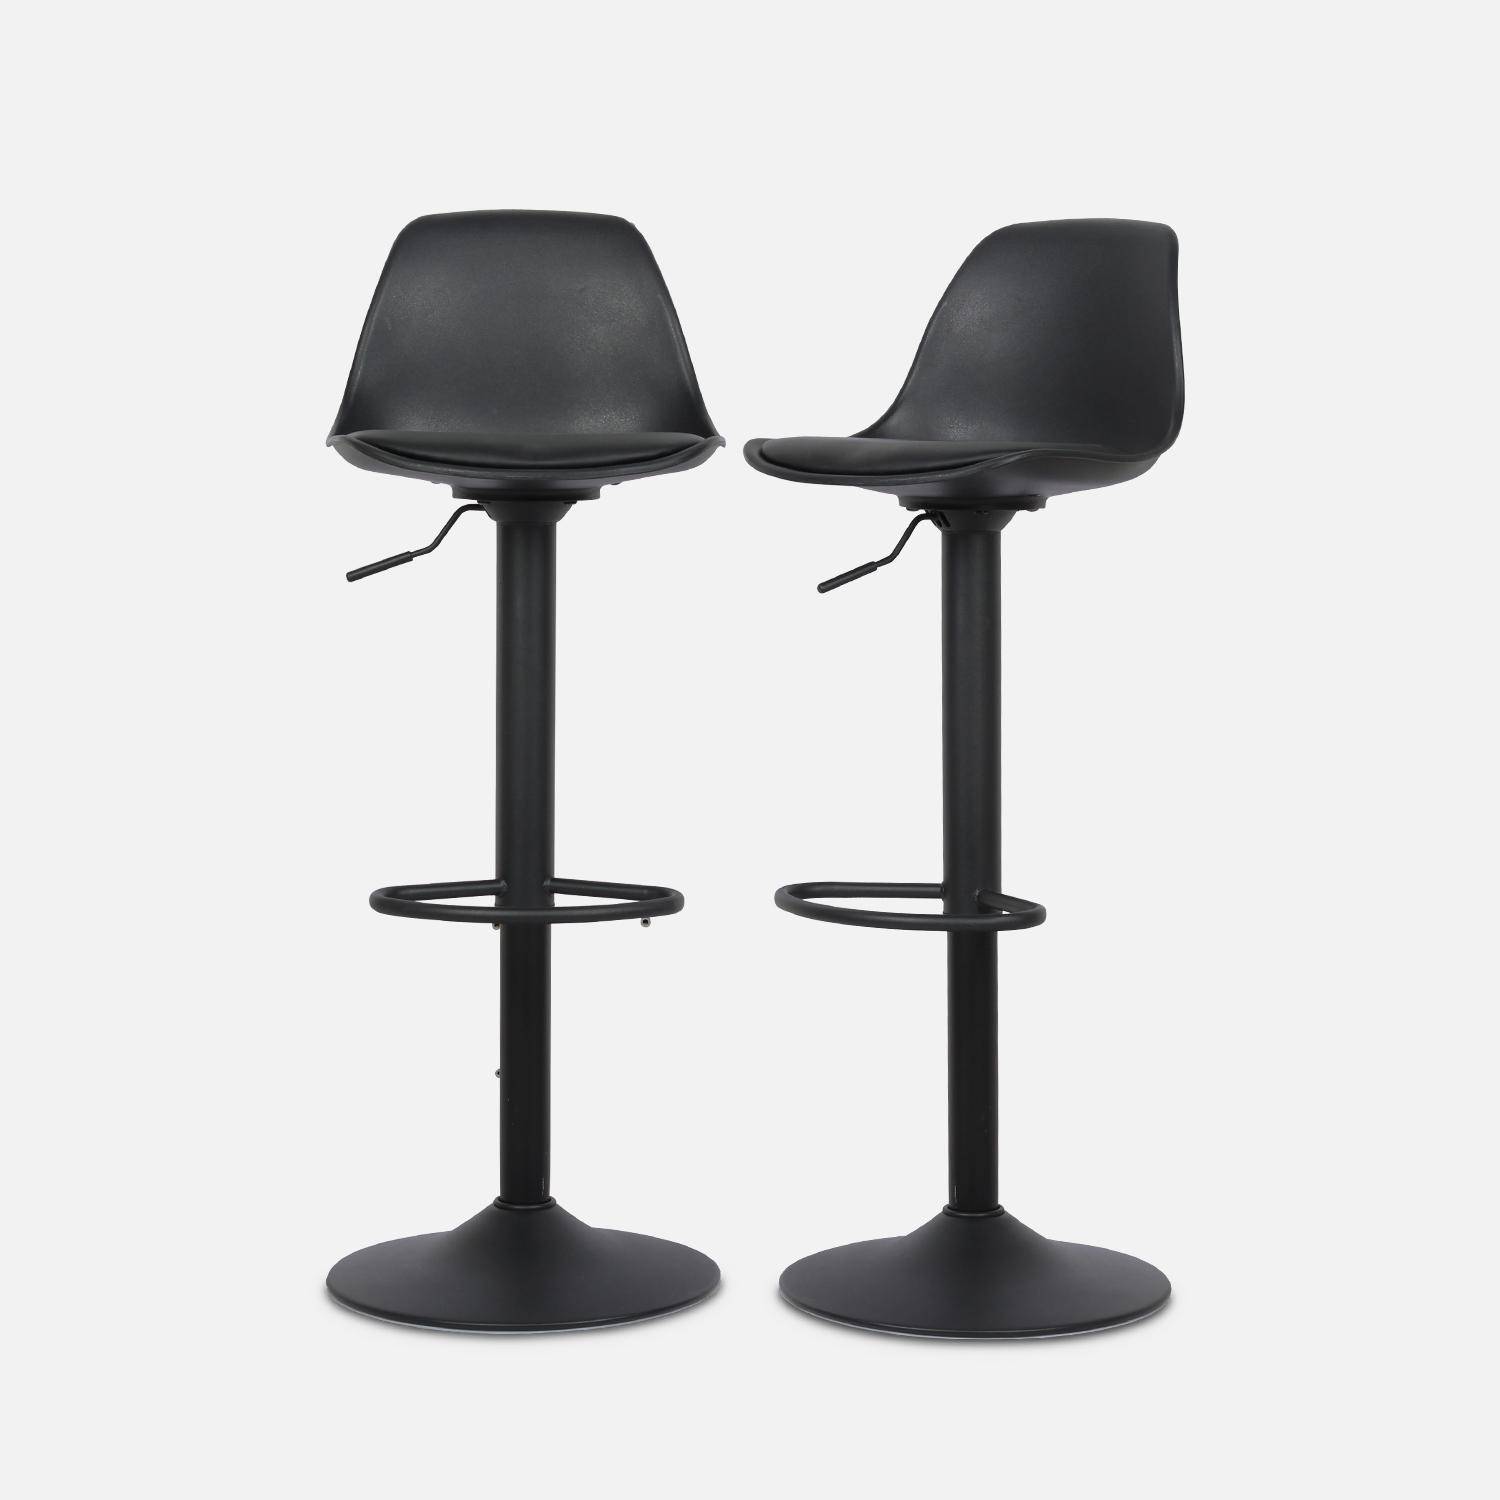 Pair of faux leather, rounded backrest, adjustable bar stools, seat height 61.5 - 83.5cm - Noah - Black Photo3